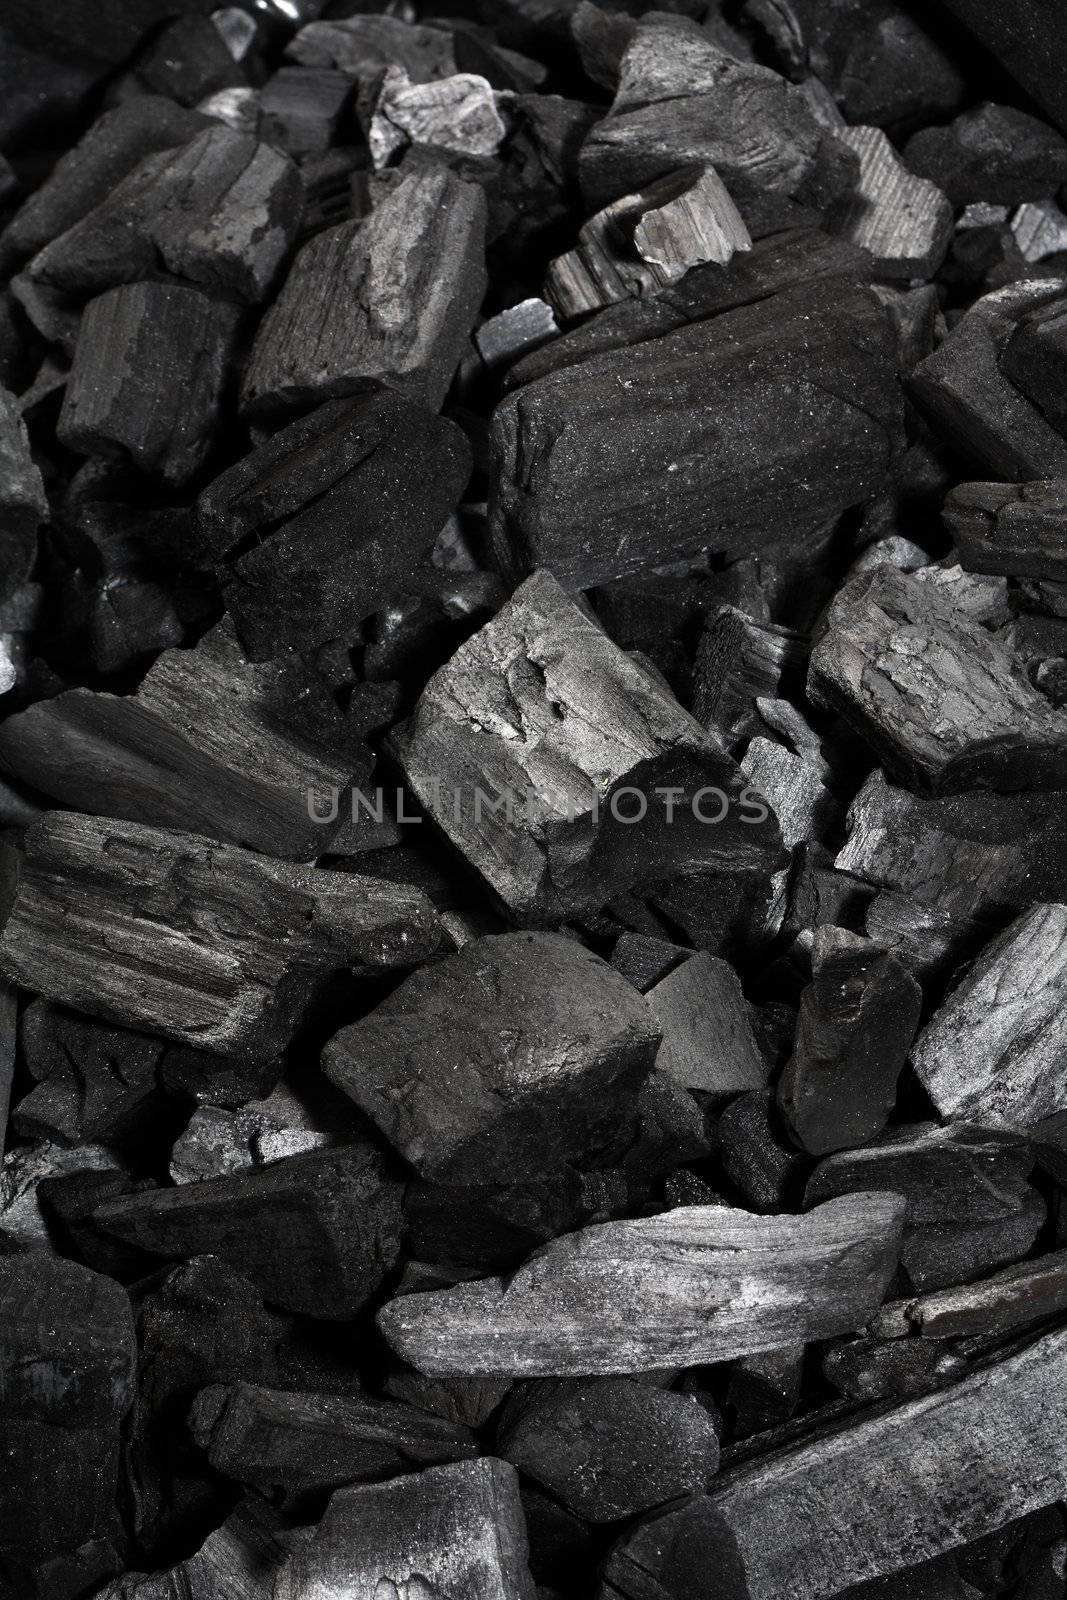 Pieces of black charcoal